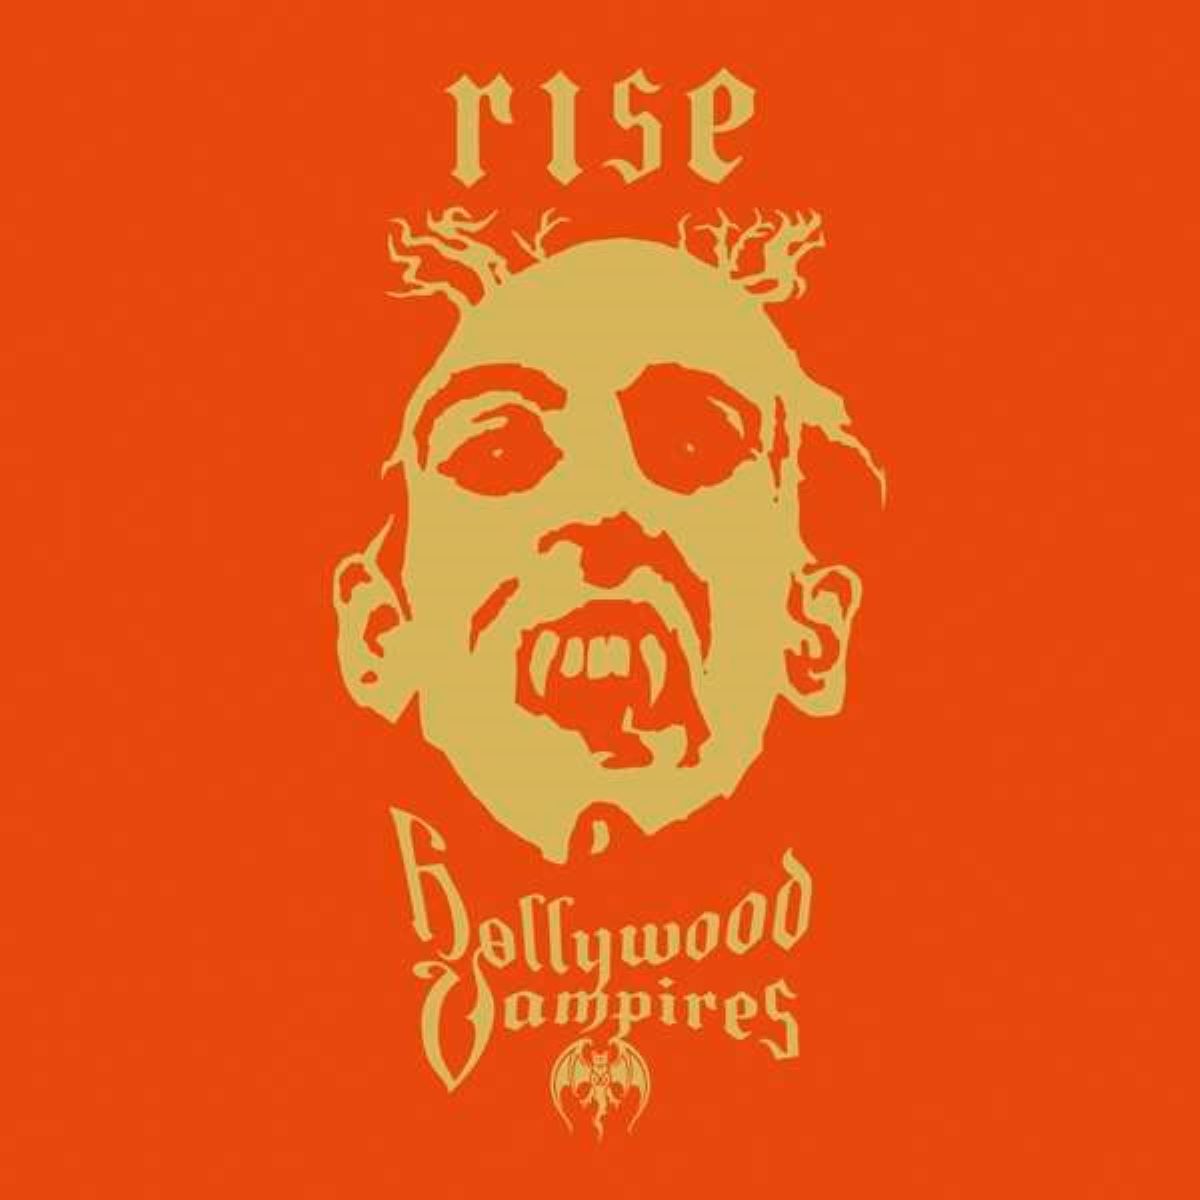 Rise von Hollywood Vampires - CD (Jewelcase, Re-Release)